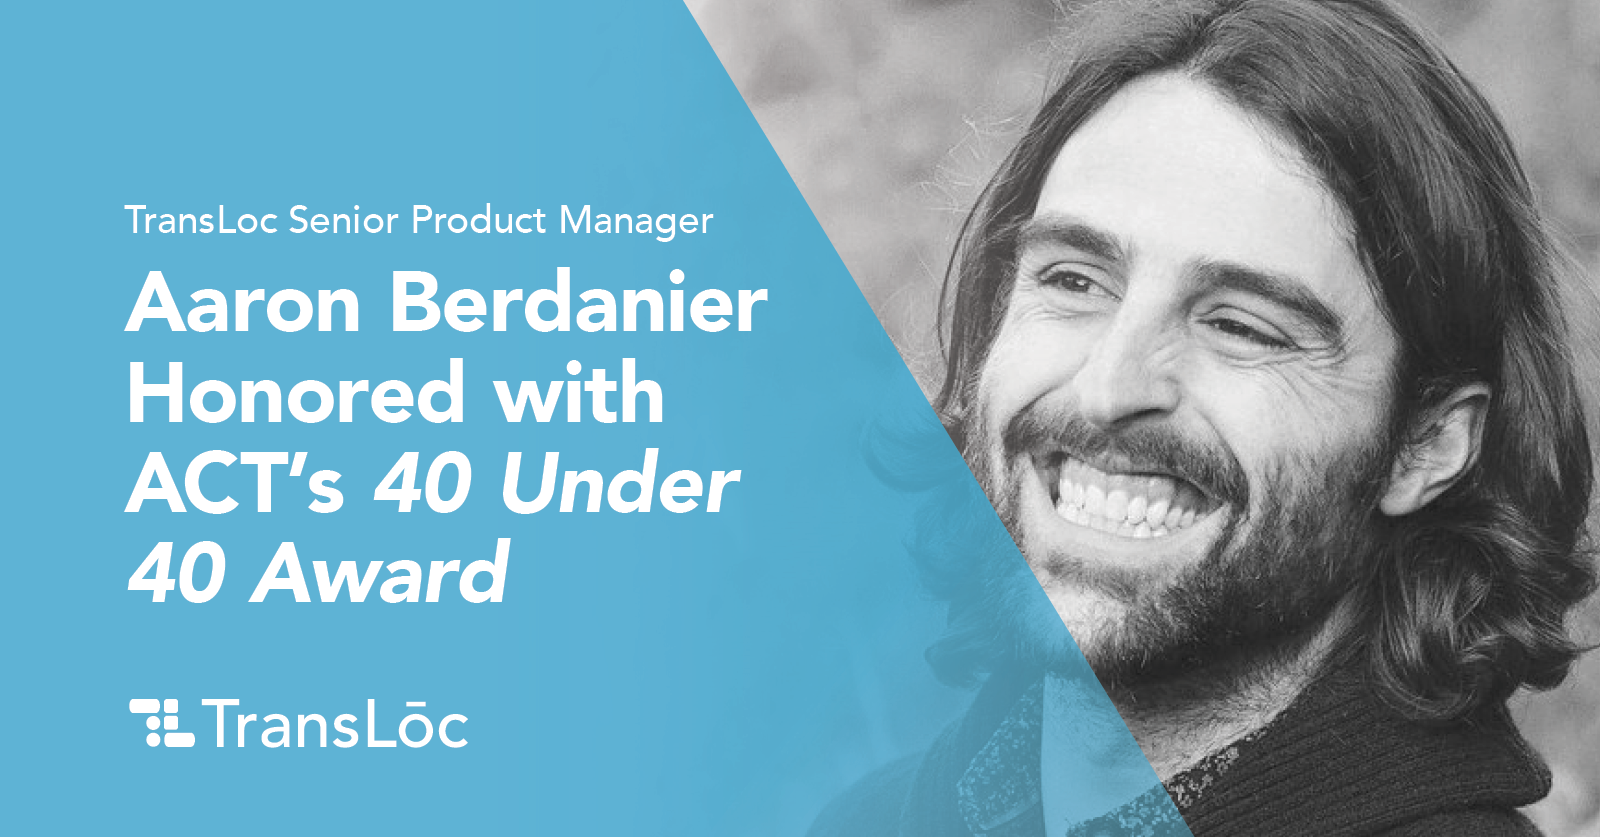 Aaron Berdanier Honored with ACT's 40 Under 40 Award